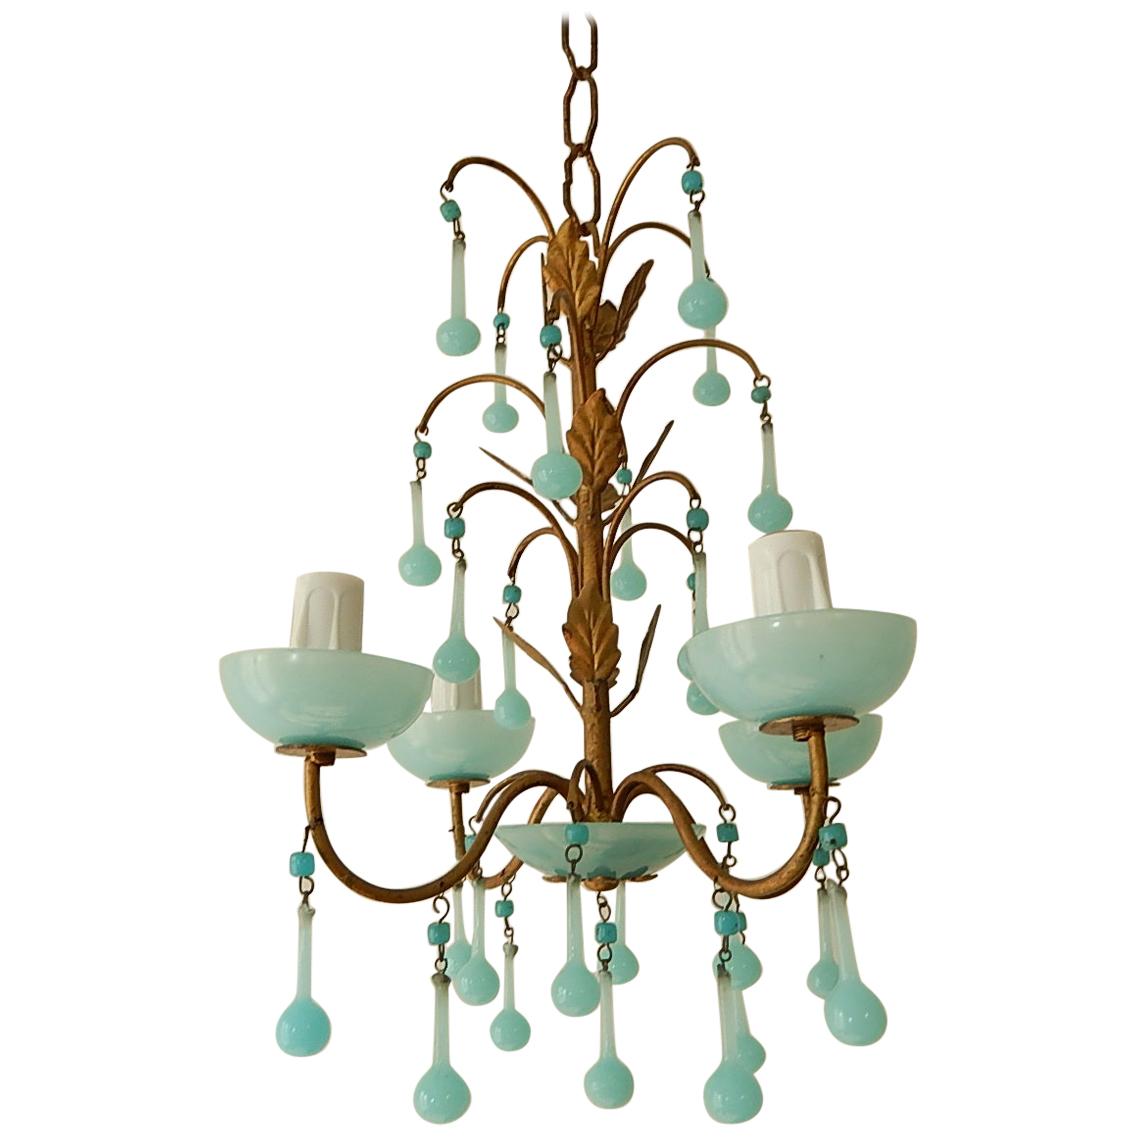 1930 Petit French Blue Opaline Bobeches, Beads and Drops Chandelier